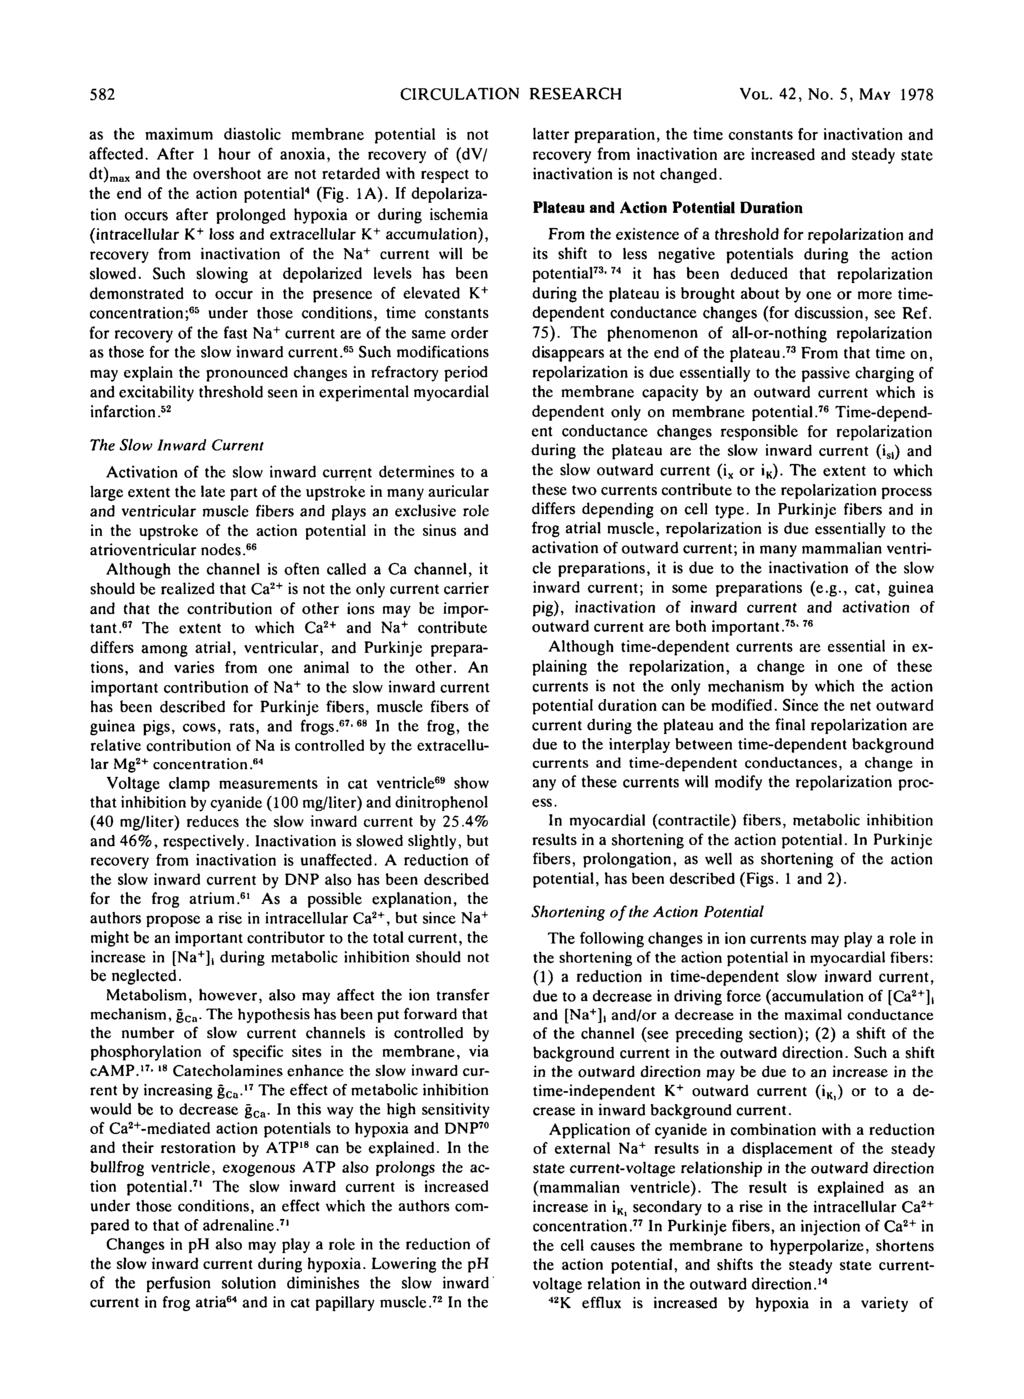 582 CIRCULATION RESEARCH VOL. 42, NO. 5, MAY 1978 as the maximum diastolic membrane potential is not affected.